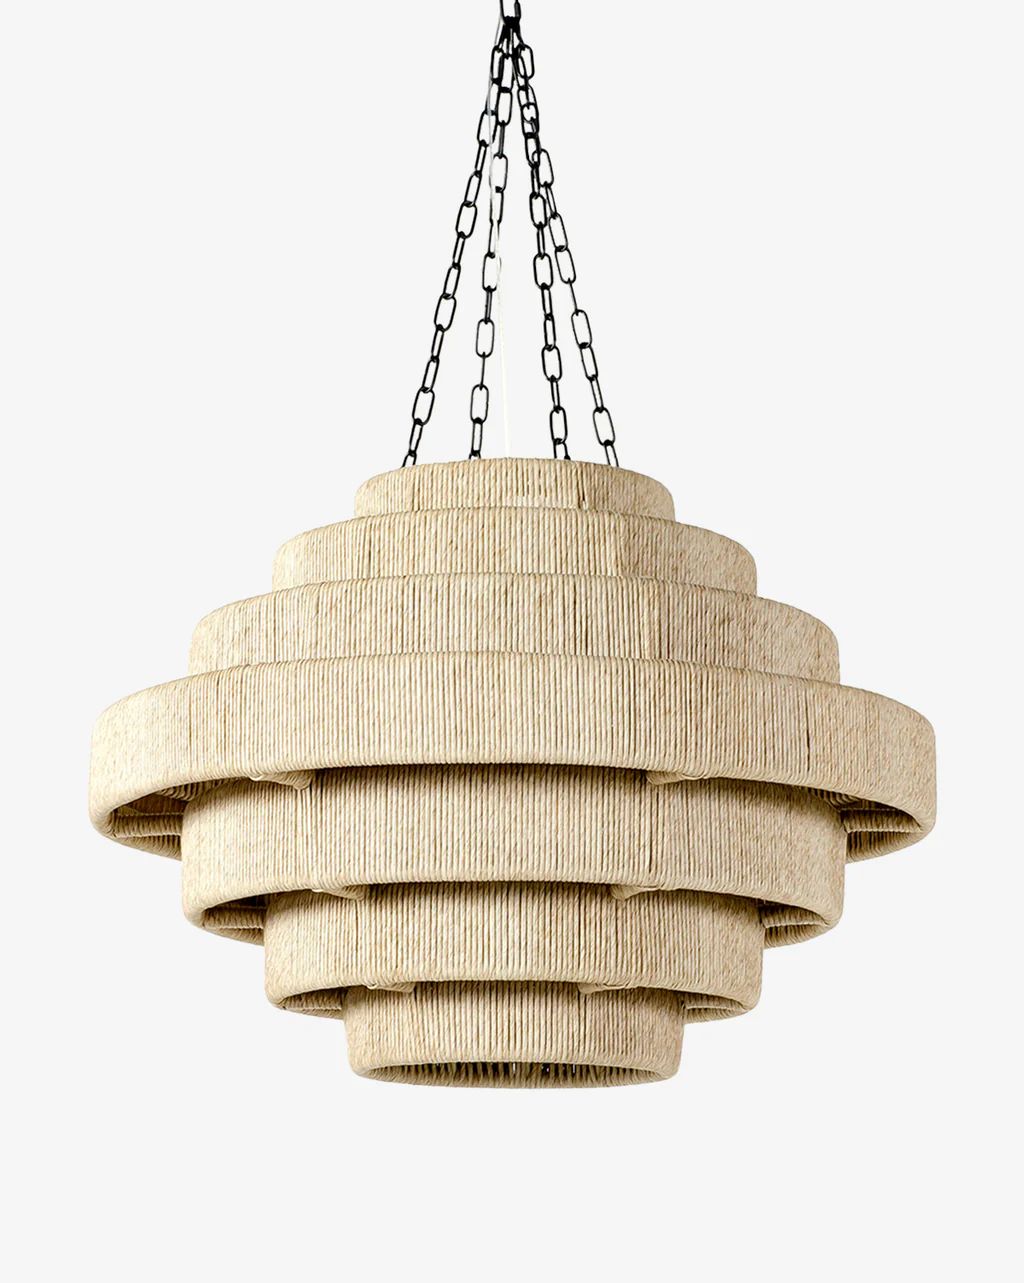 Everly Outdoor Pendant | McGee & Co.